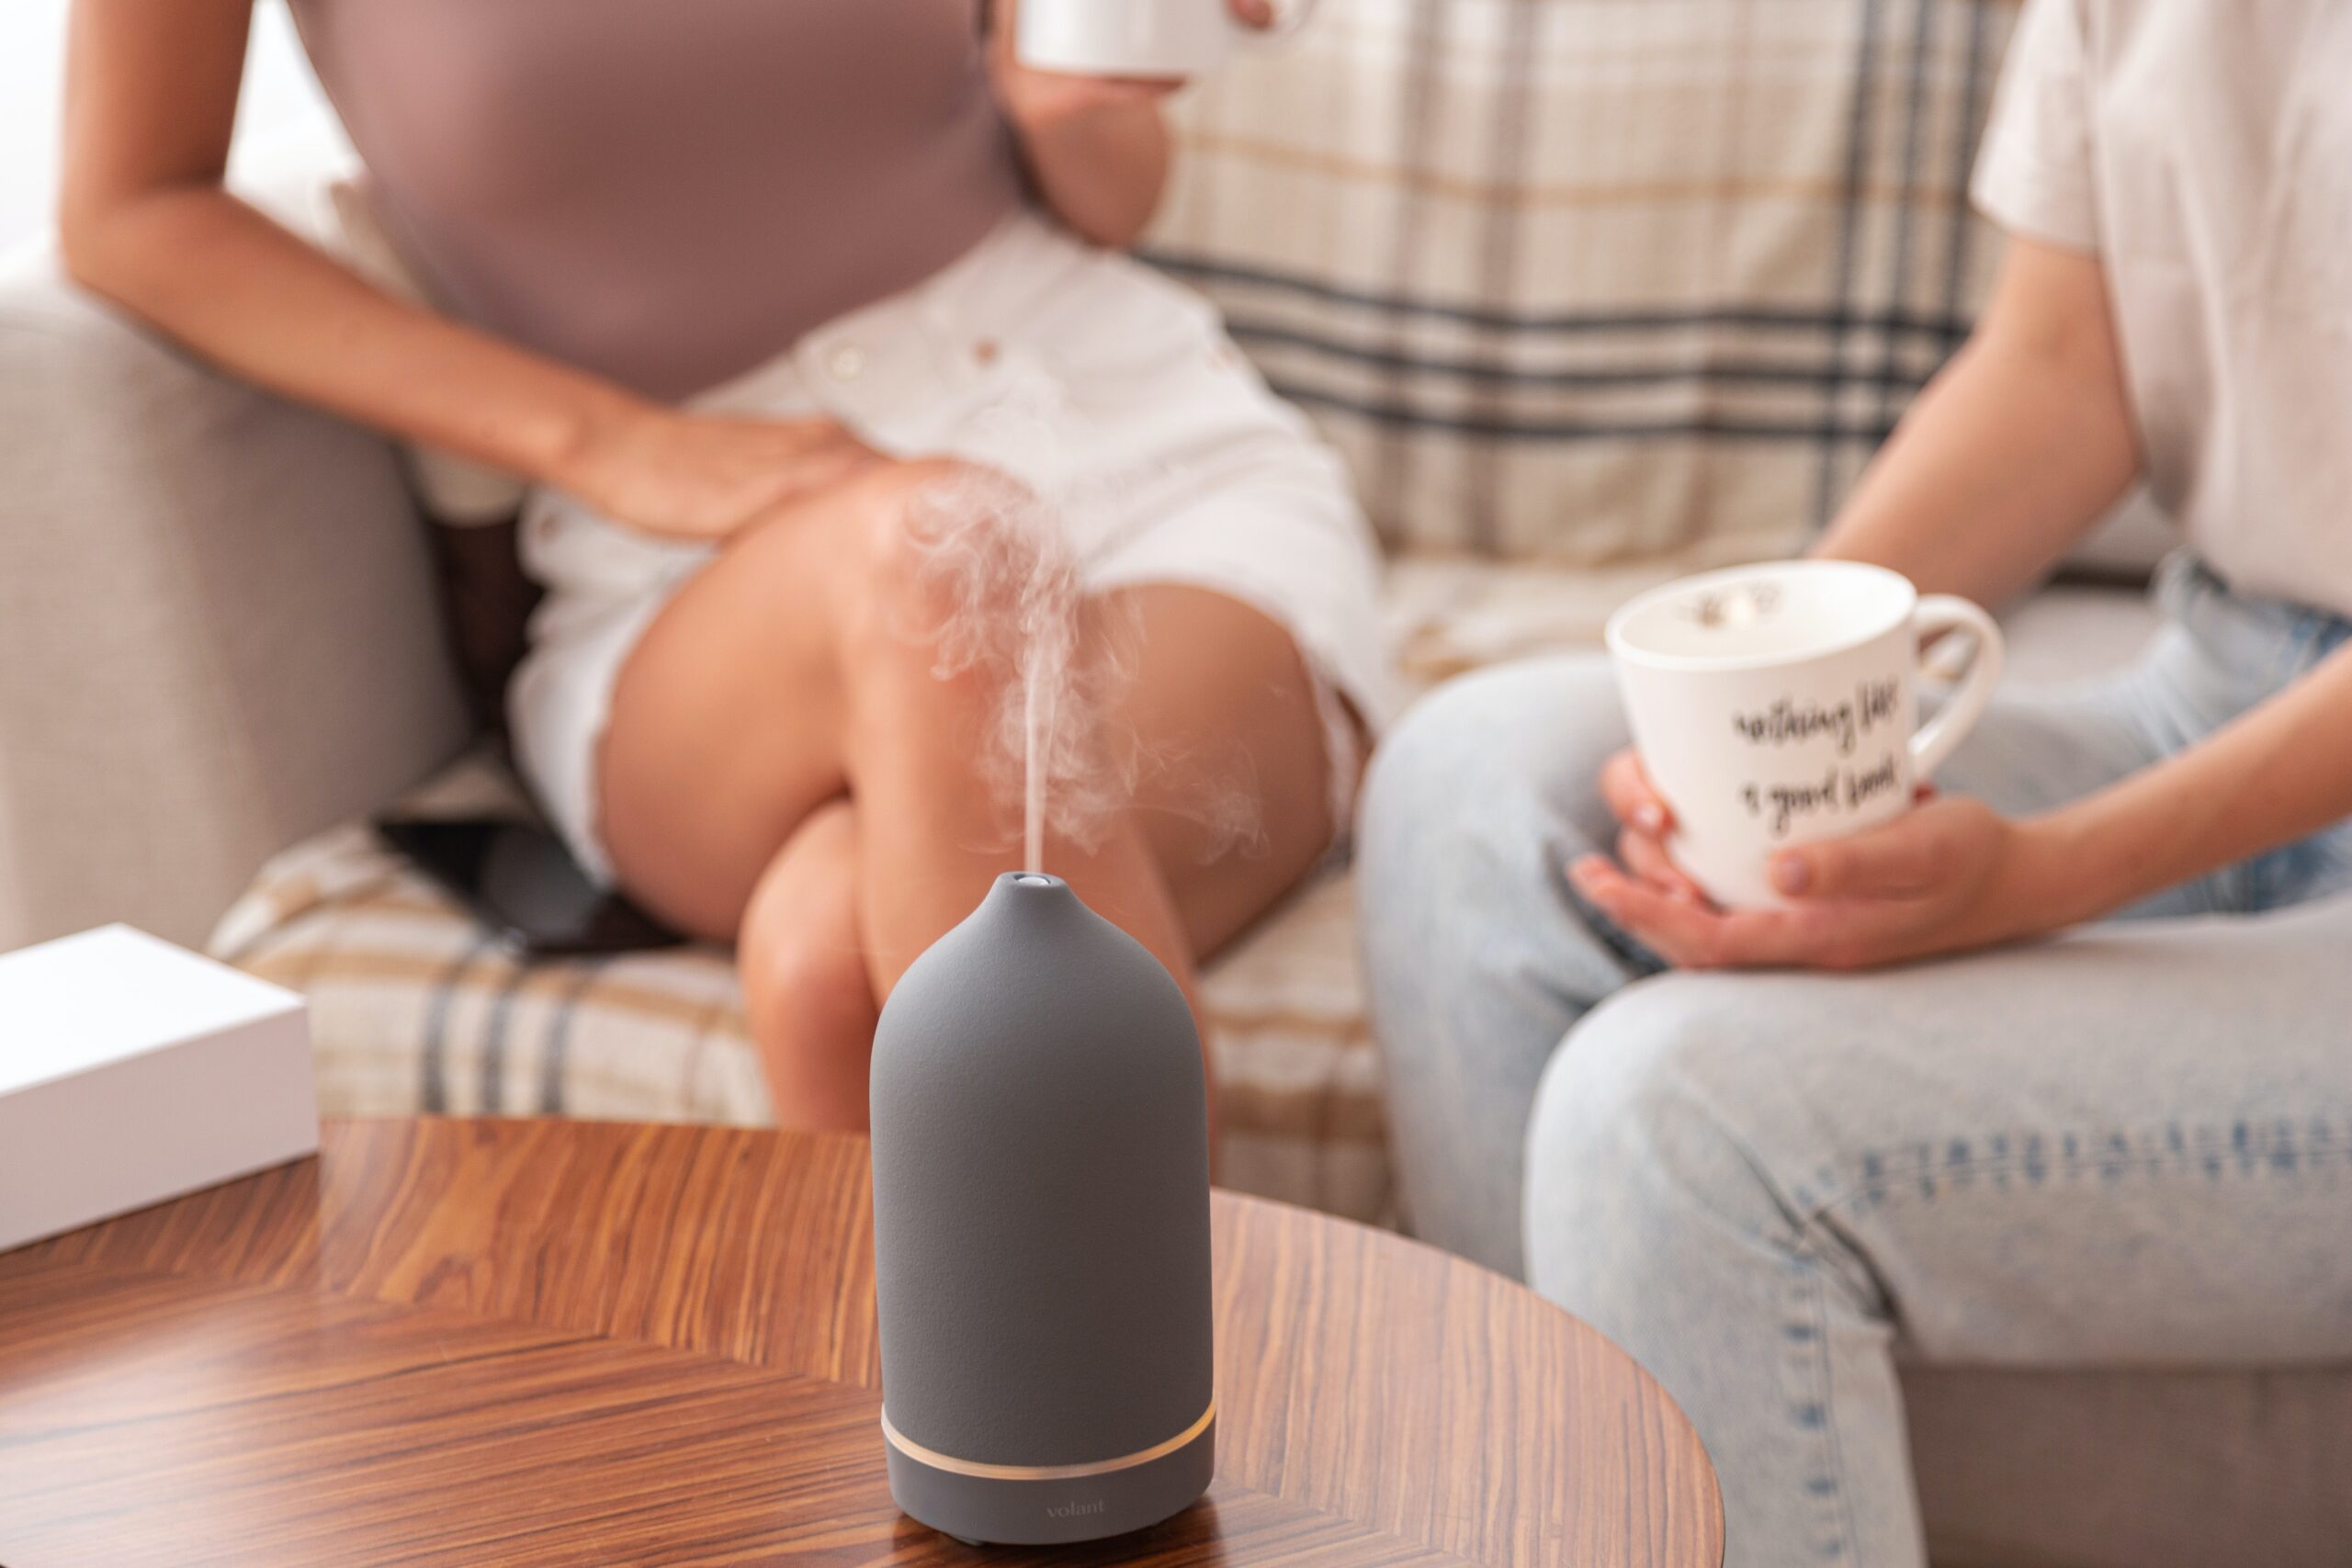 A table with an air purifier on it and two people in the background drinking out of coffee mugs